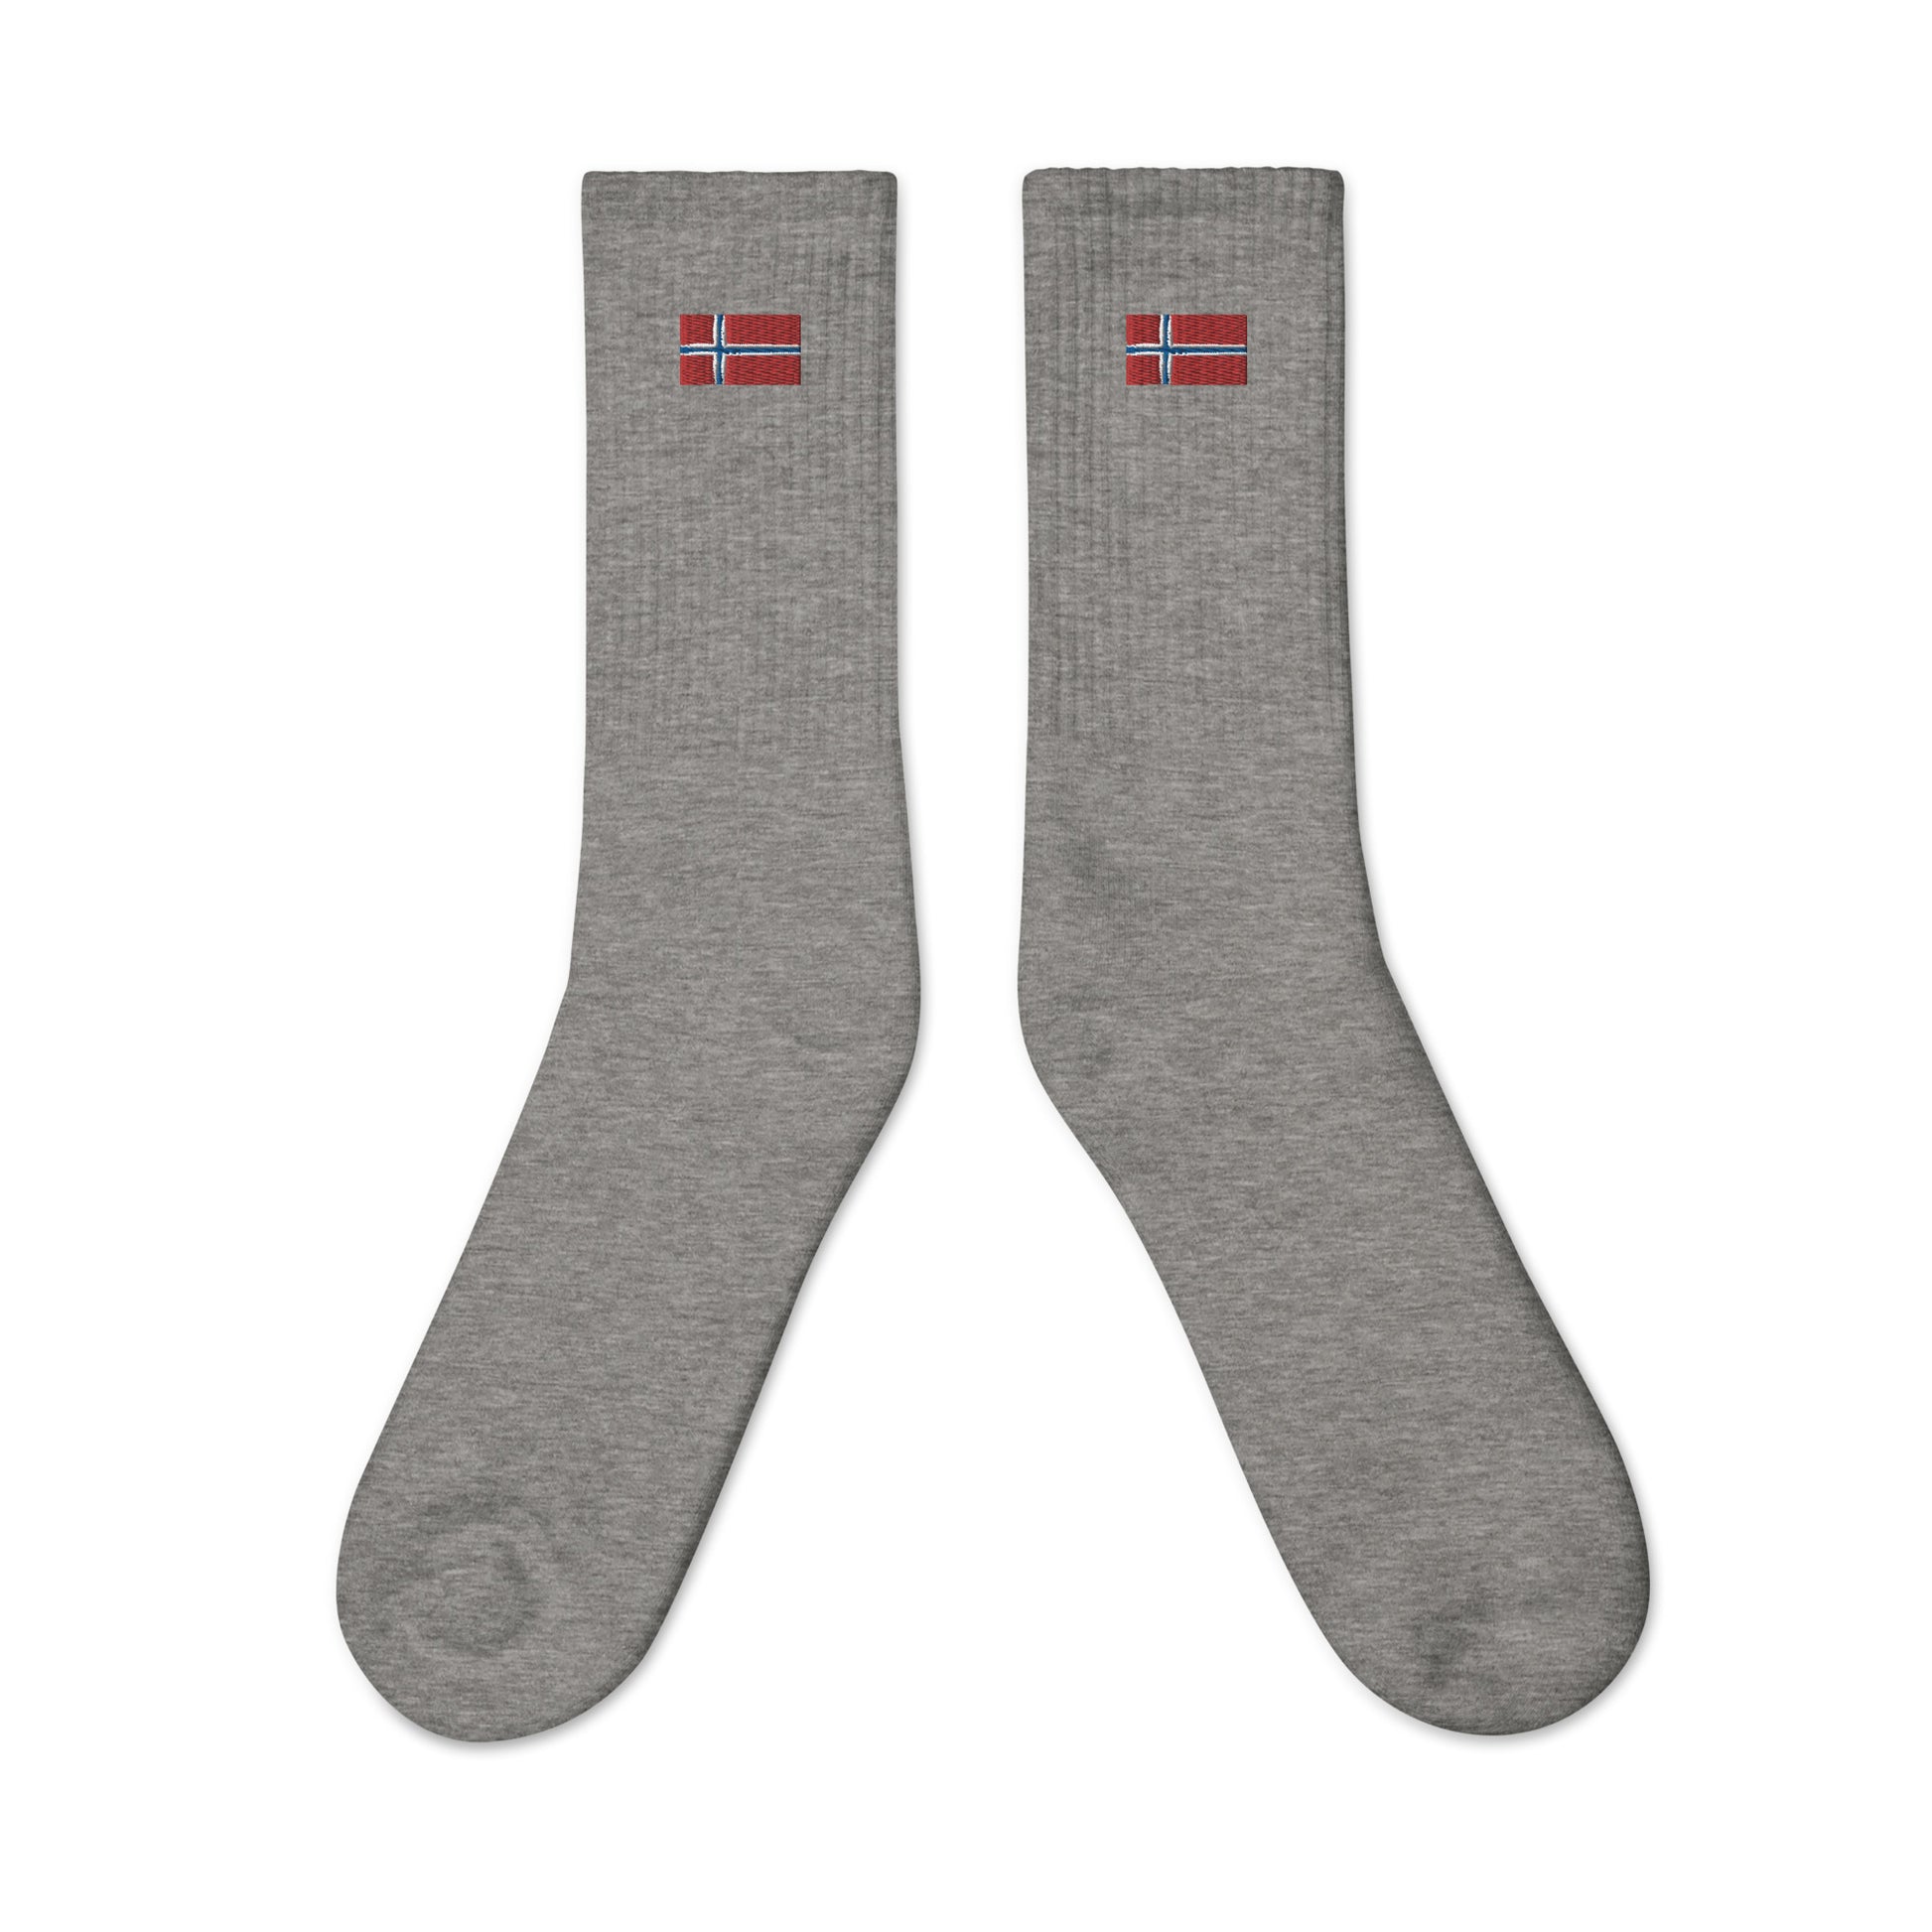 socks-from-the-front-with-a-norwegian flag